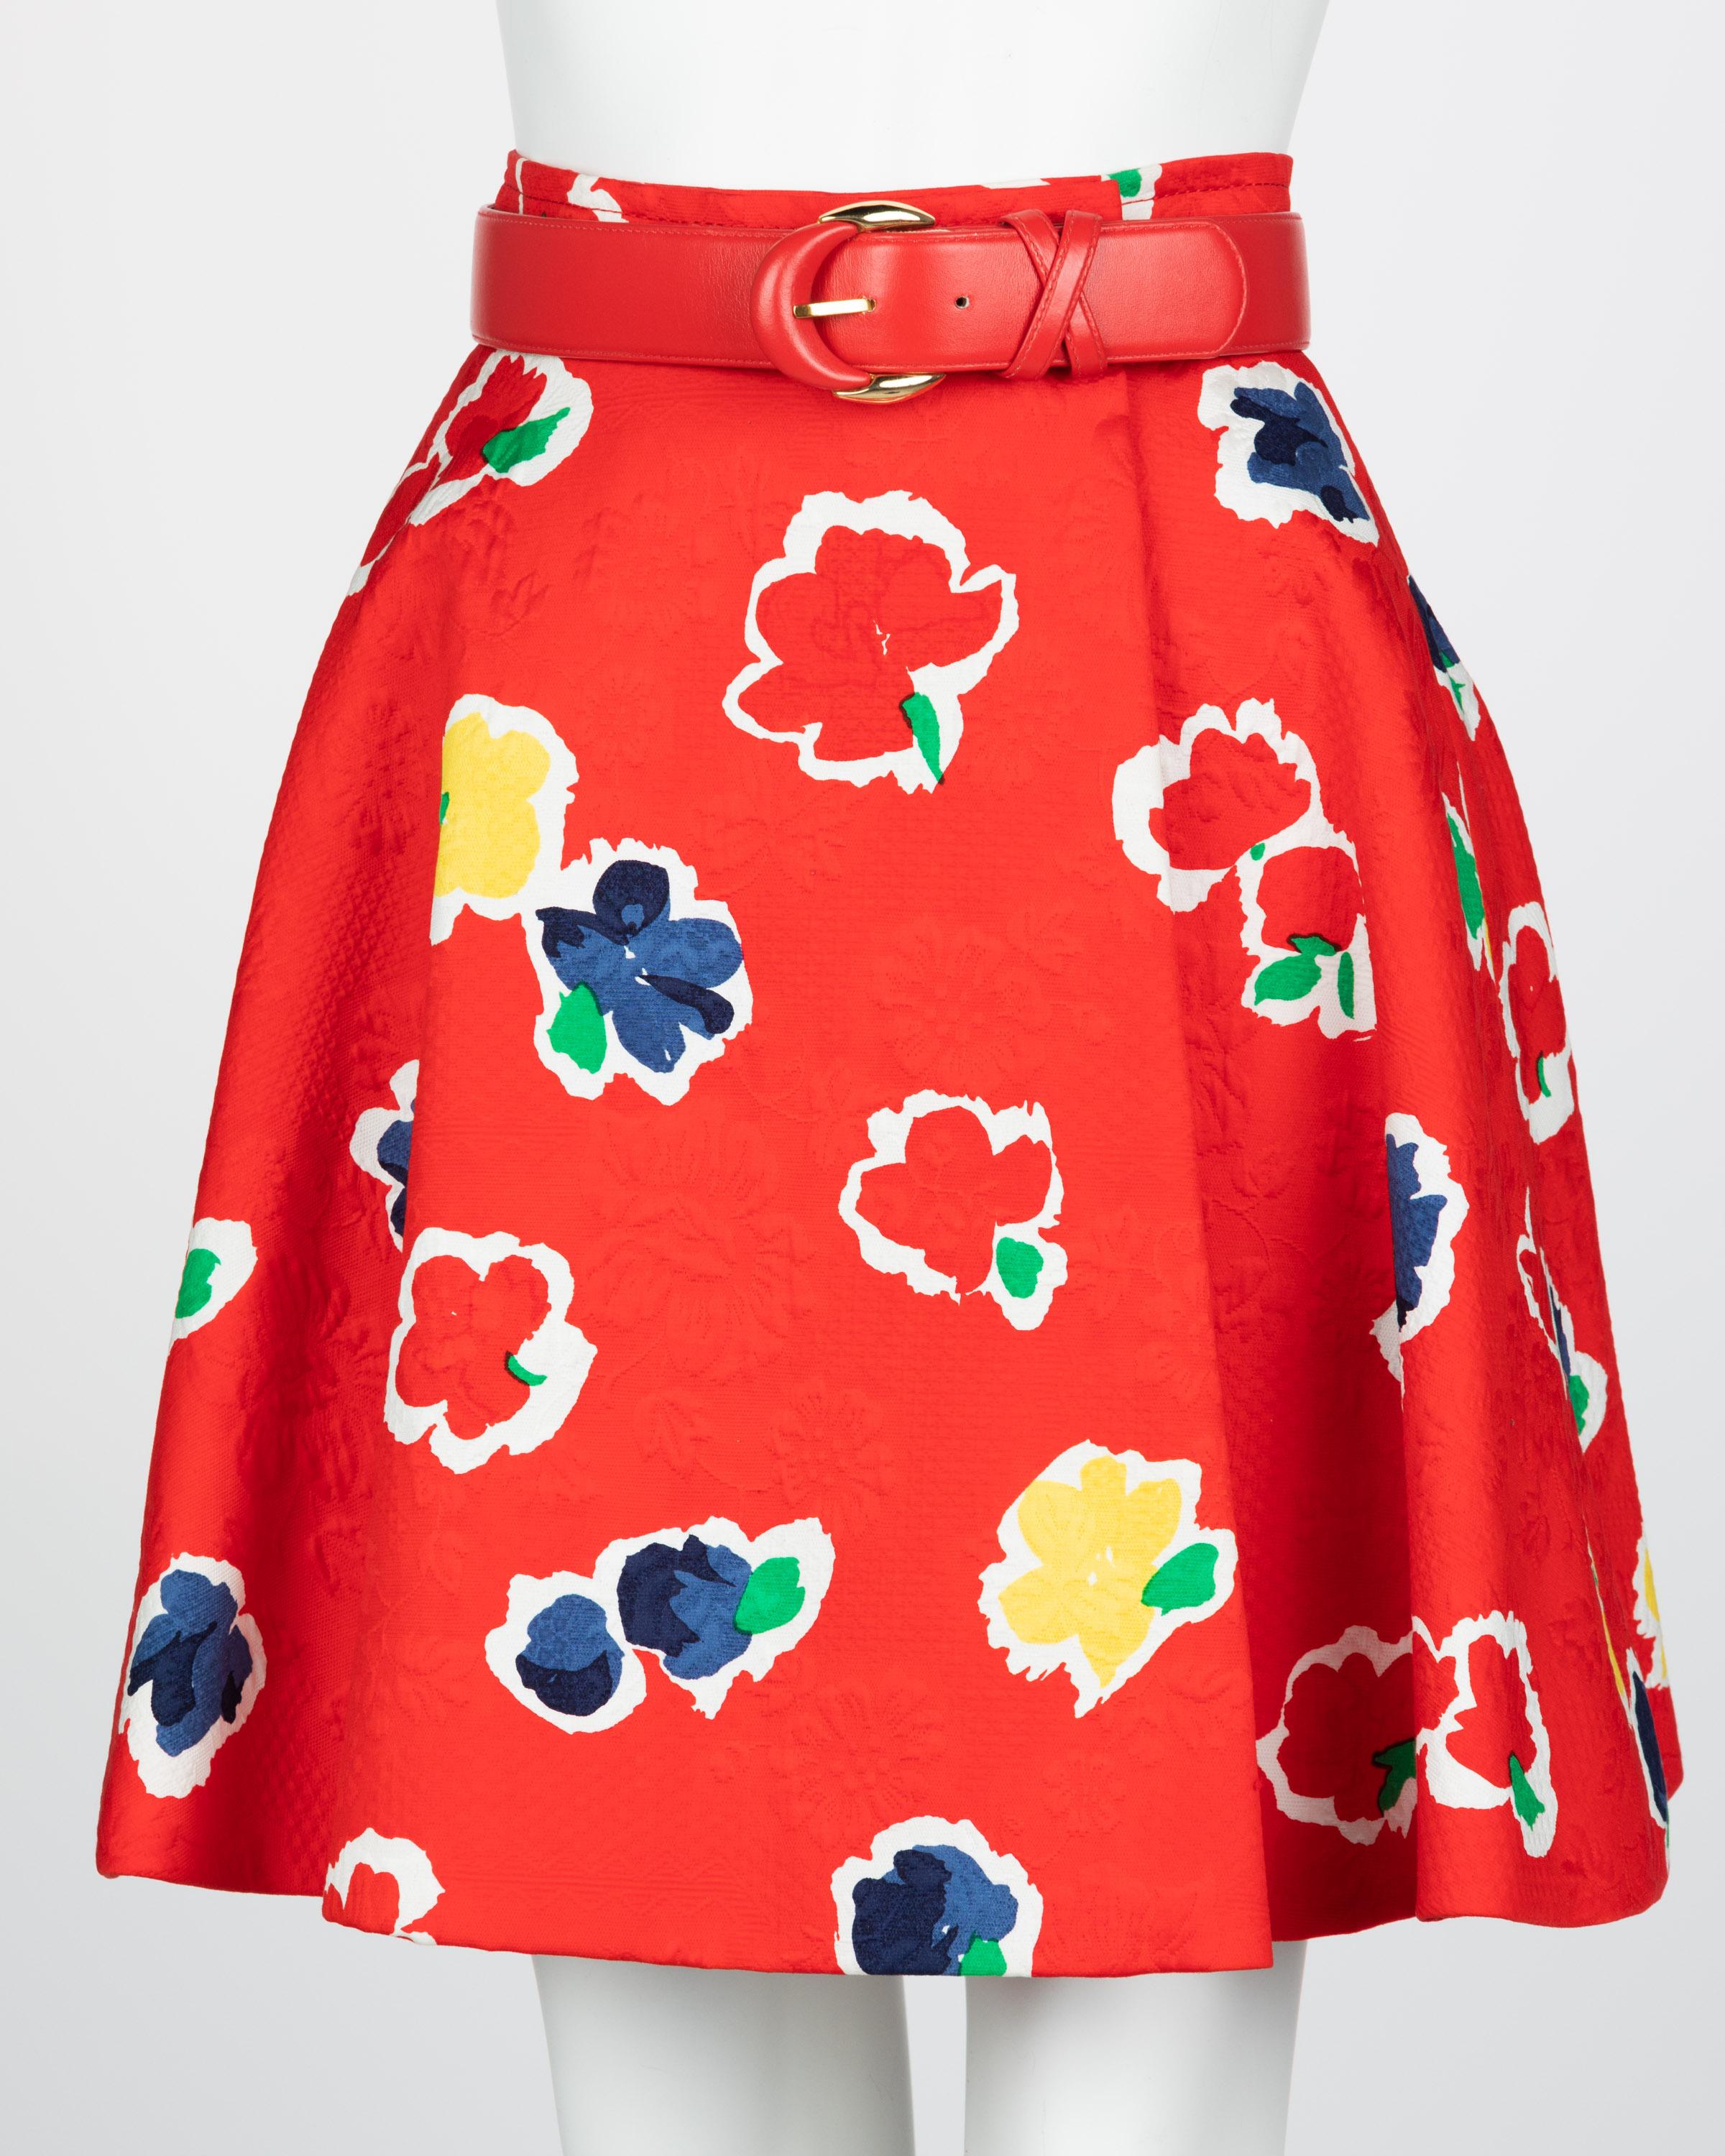 Galanos Red Floral Cotton Wrap Skirt w/ Belt, 1980s For Sale 4